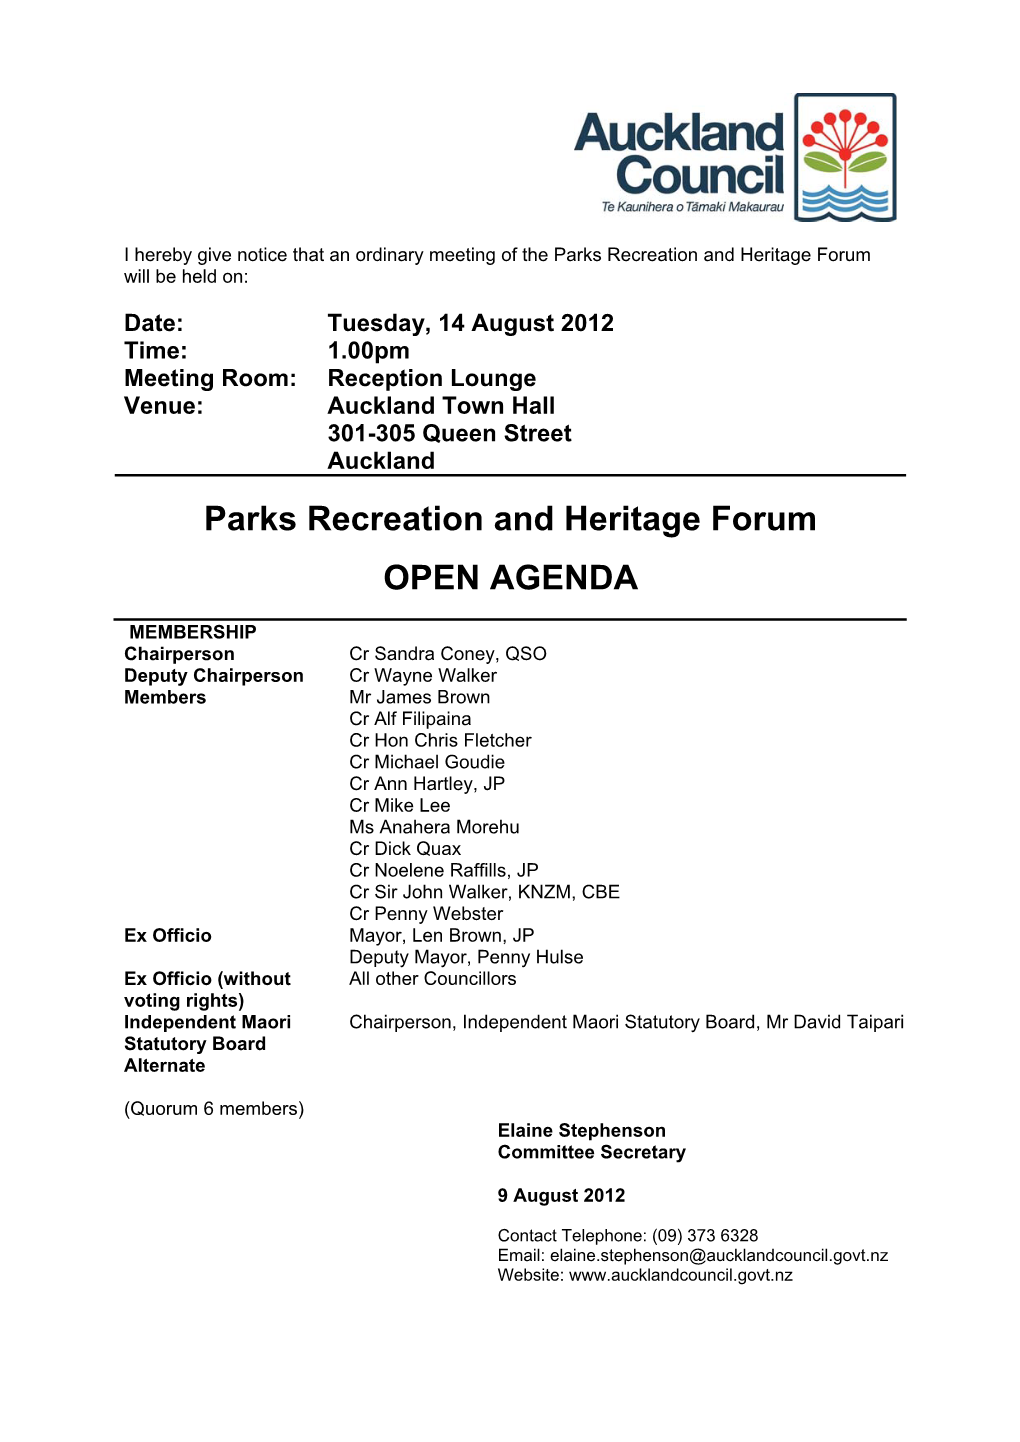 Parks Recreation and Heritage Forum Agenda